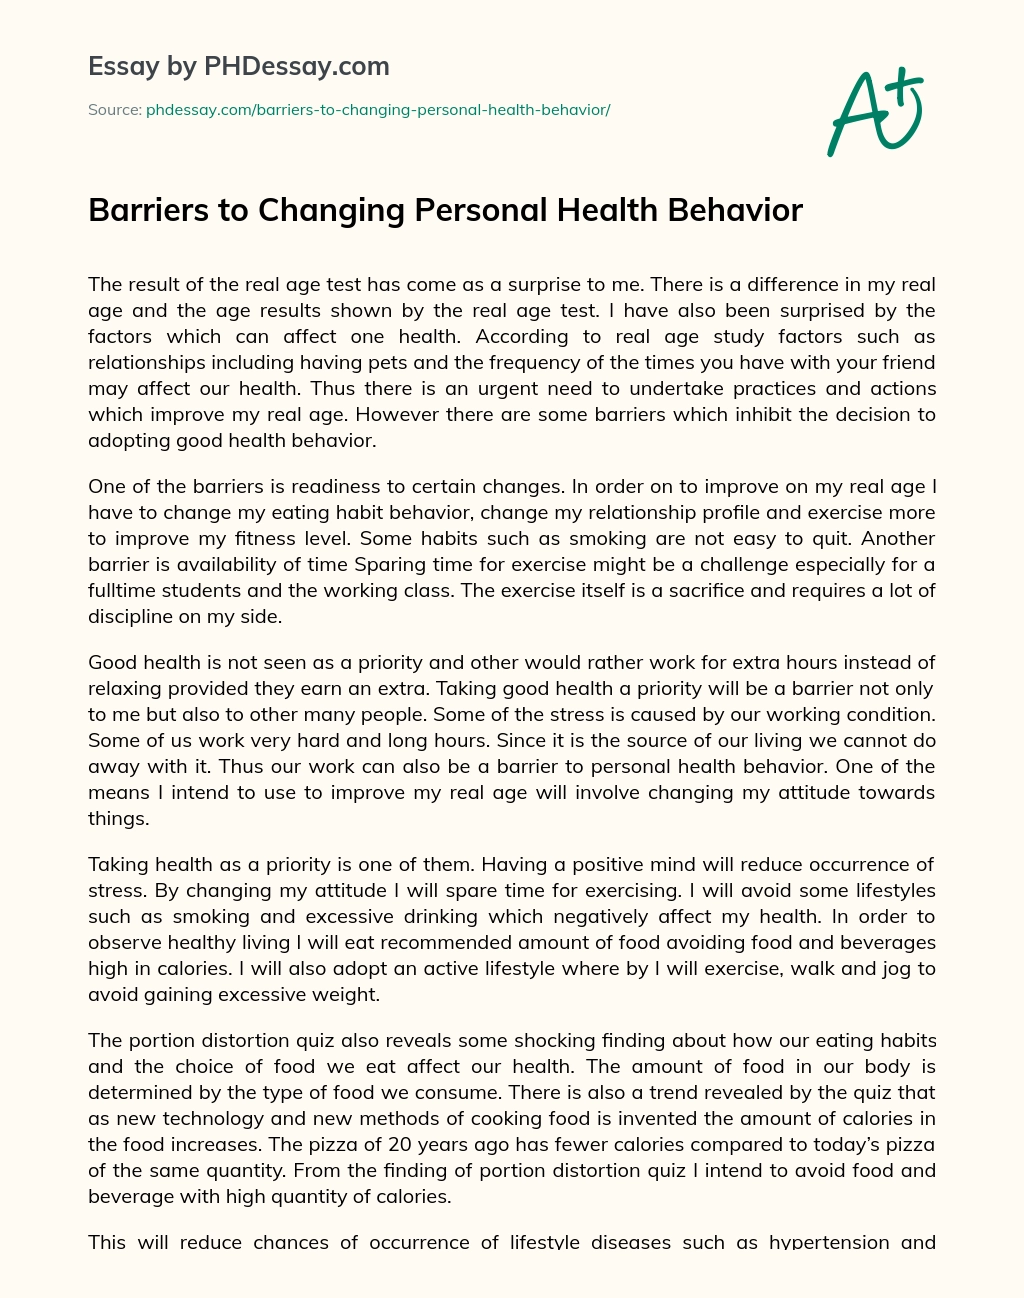 Barriers to Changing Personal Health Behavior essay